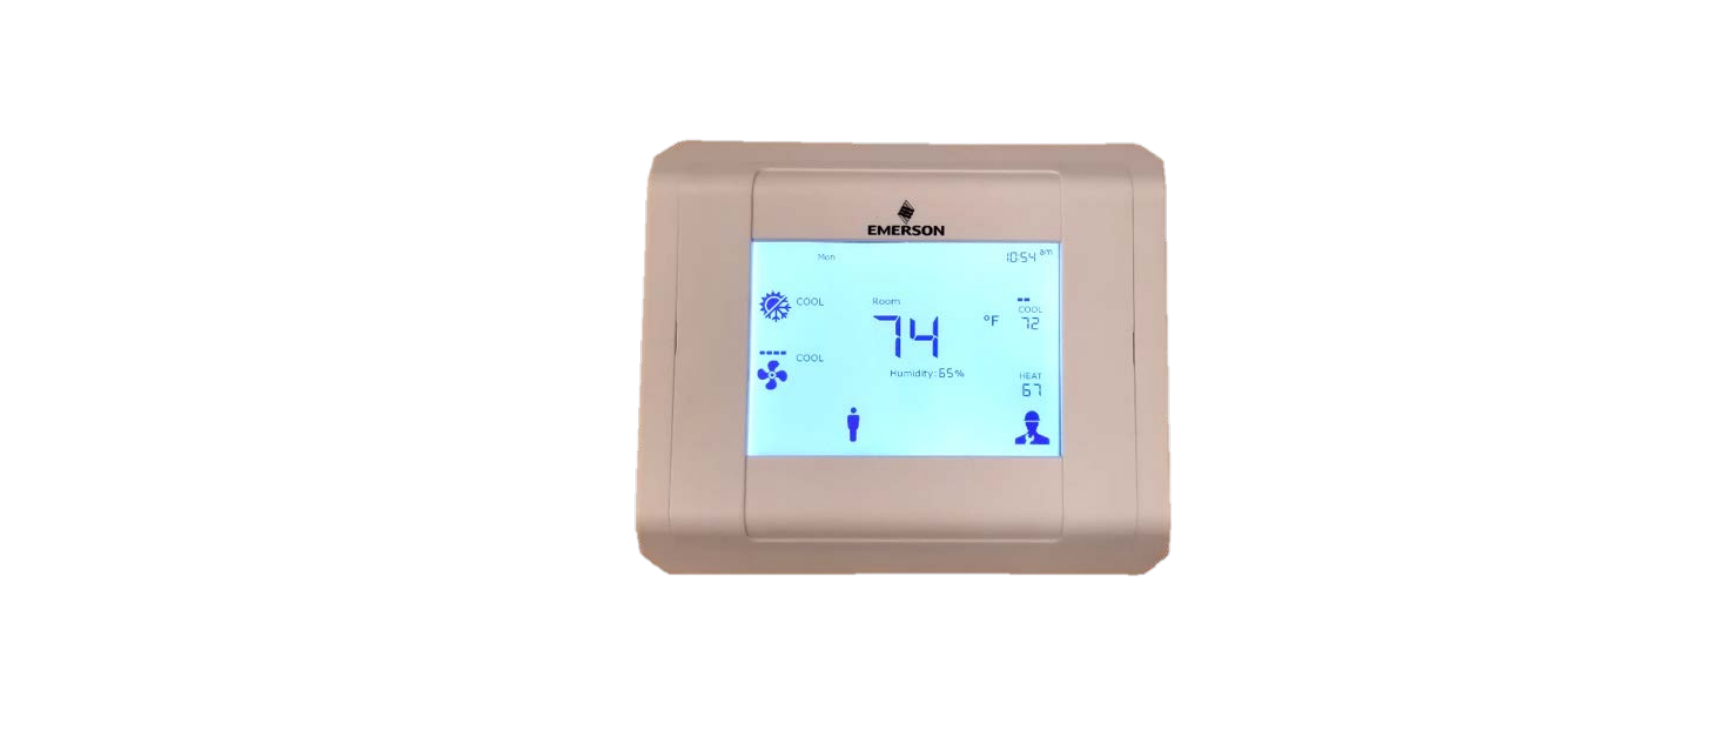 Emerson 026-1739 Programmable Touchscreen Thermostat User Manual